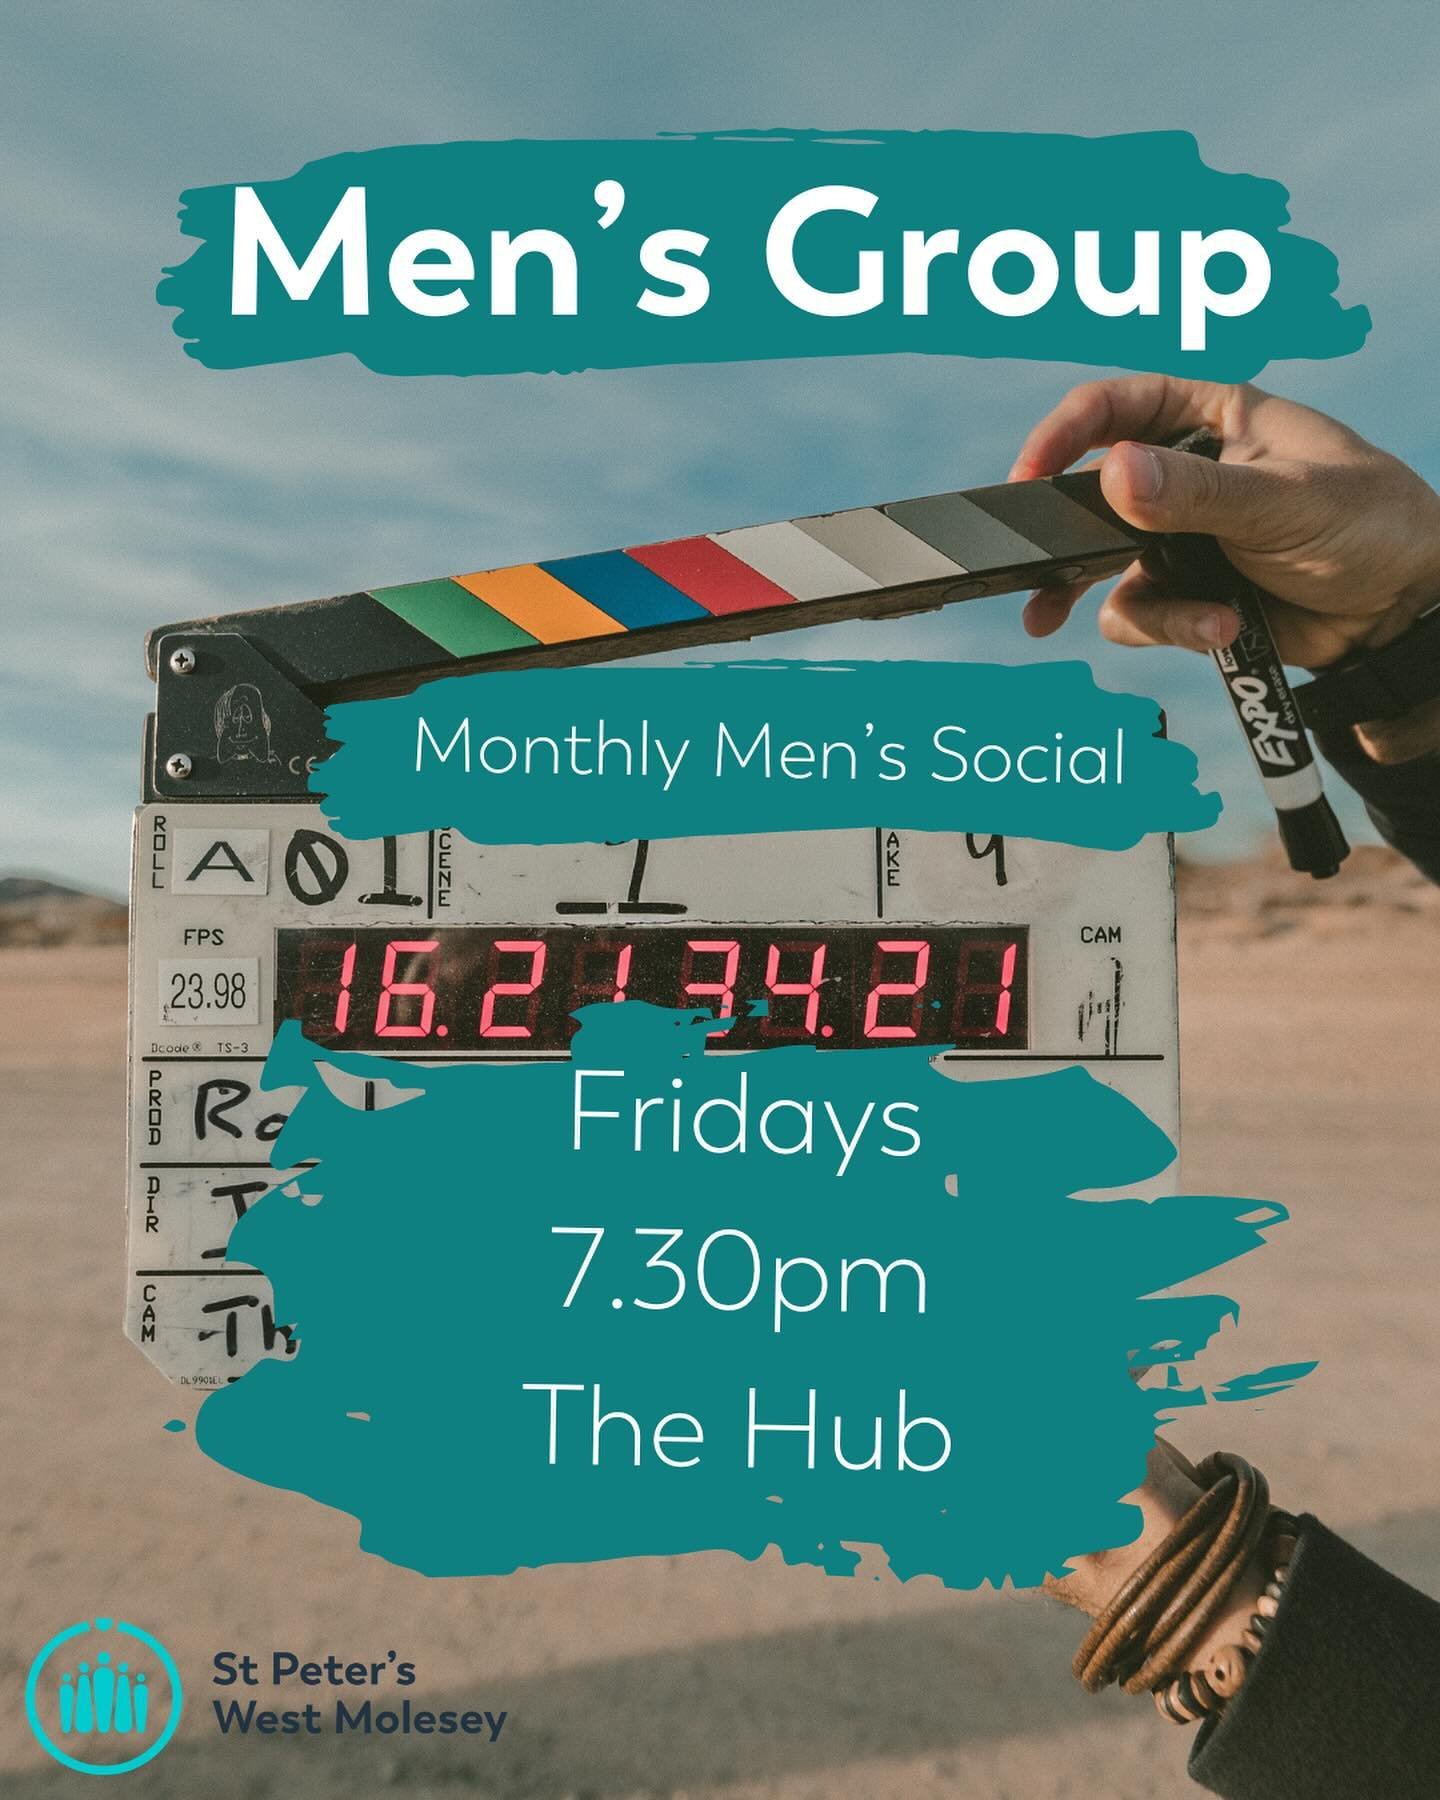 This Friday and Saturday at St Peter&rsquo;s:

Men&rsquo;s Group - film night with snacks provided at the St Peter&rsquo;s Community and Youth Hub, Ray Road

Saturday Drop In - choose from lots of activities including gardening, local litter pick, co